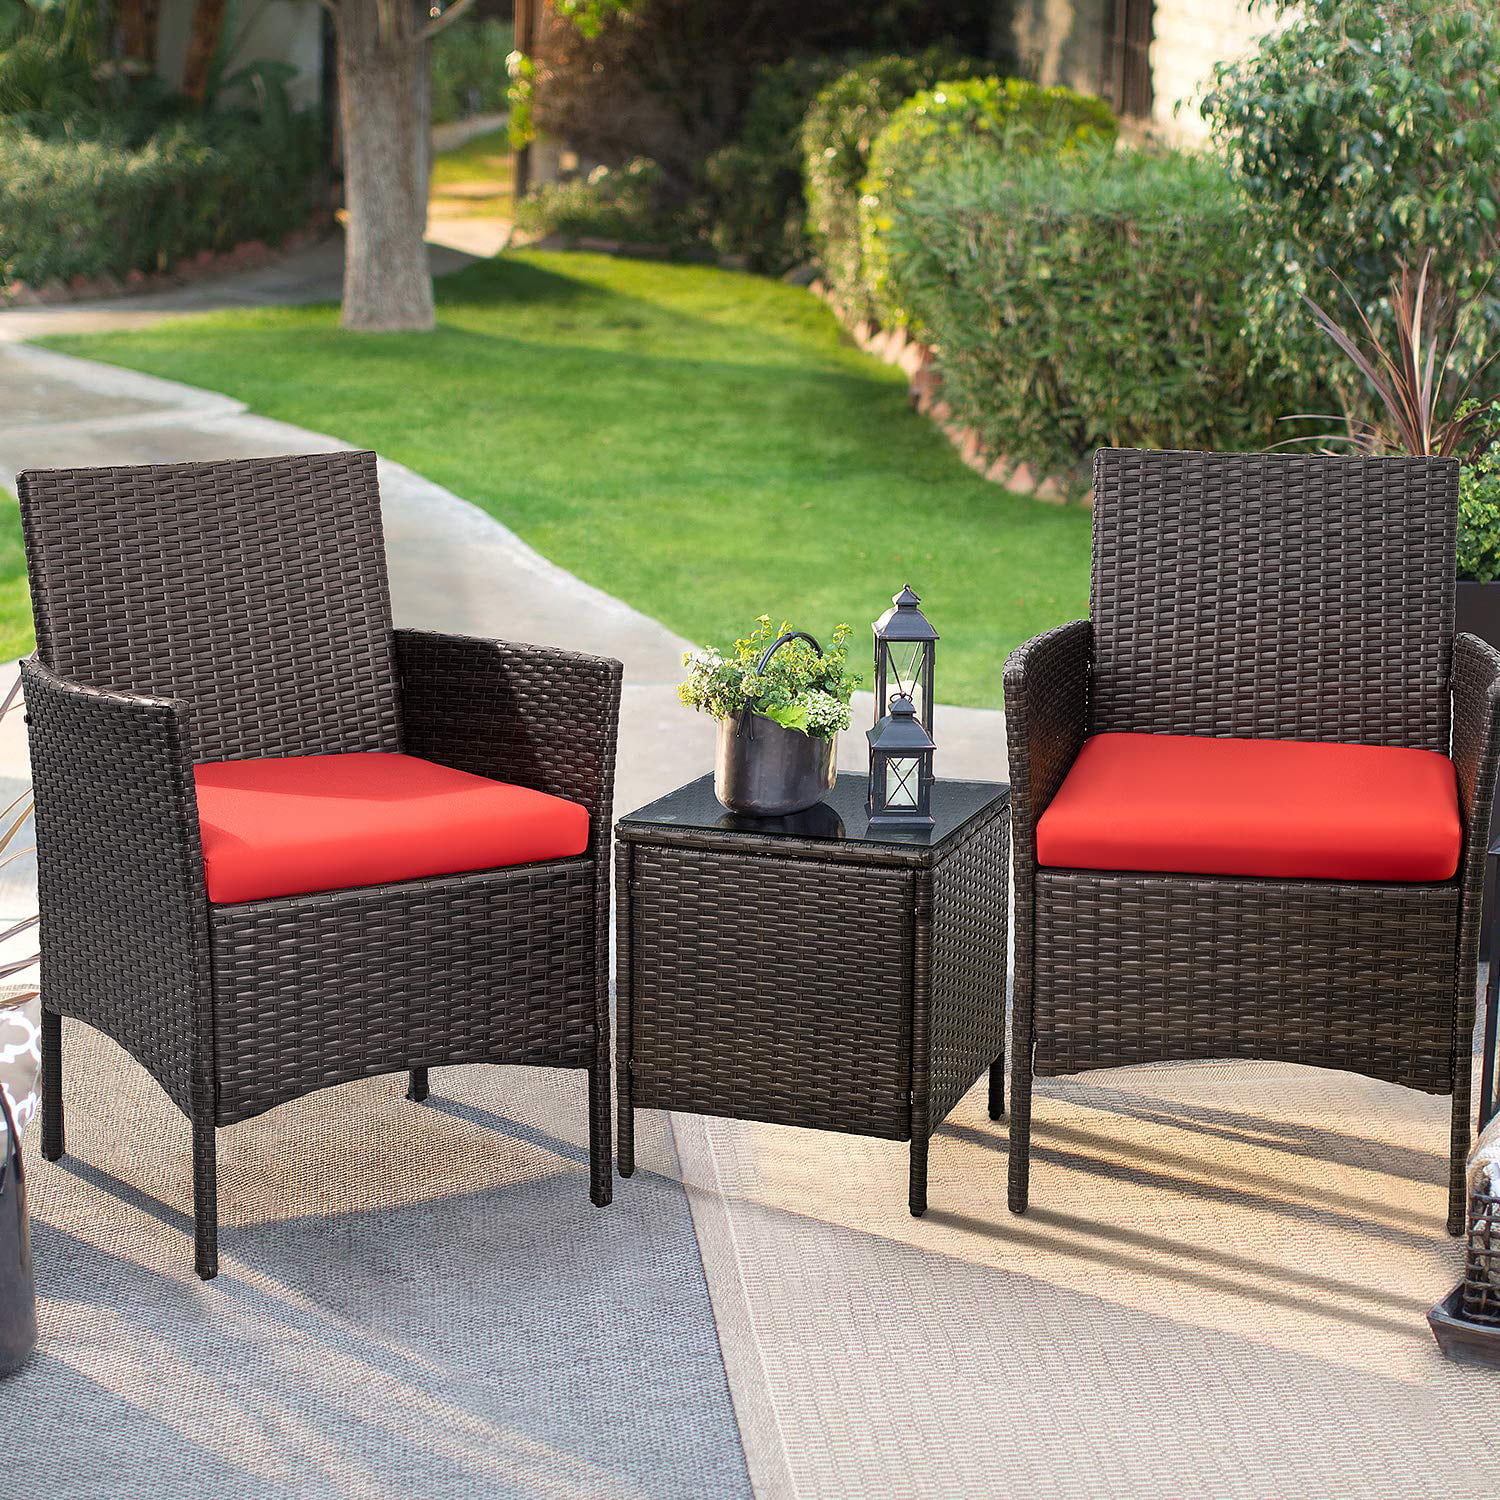 Lacoo 3 PCS Outdoor Patio Furniture PE Rattan Wicker Table and Chairs ...